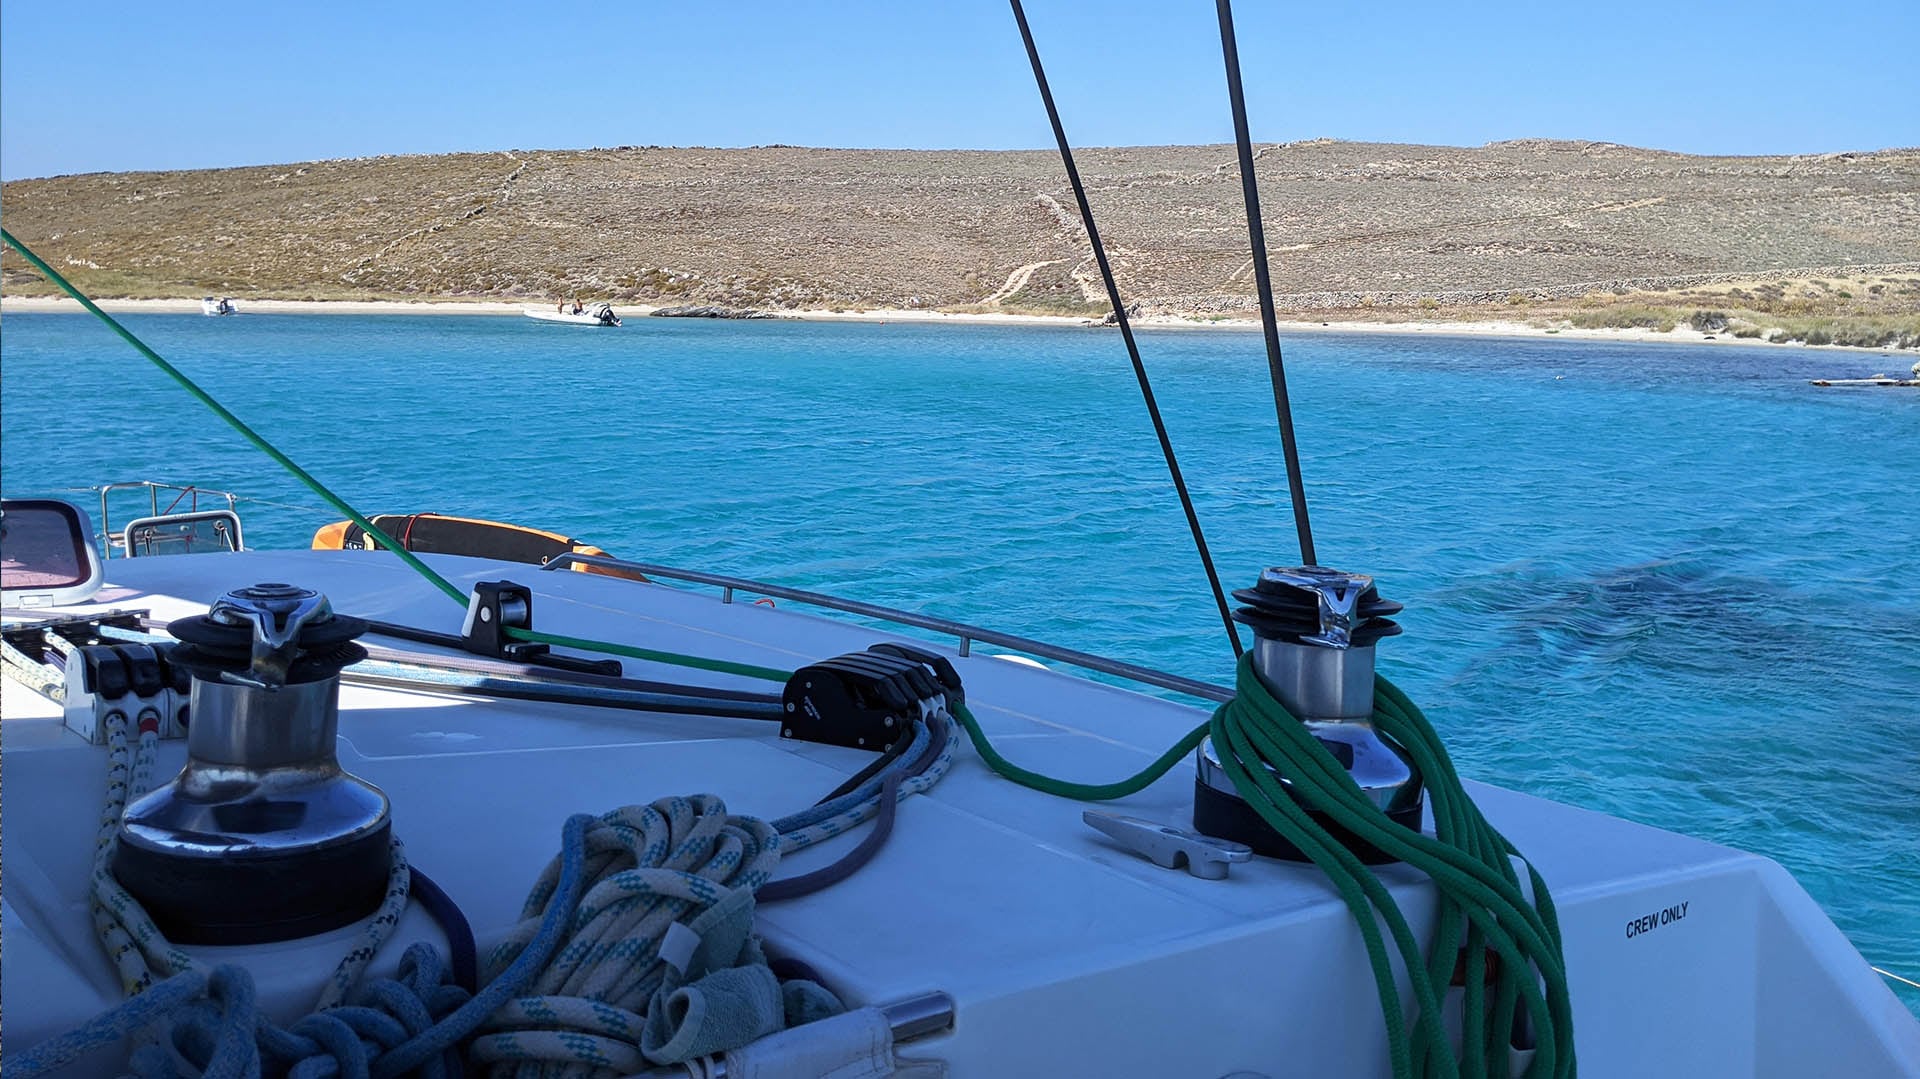             GET ON BOARD!                    sailing out of the ordinary with a luxury catamaran           